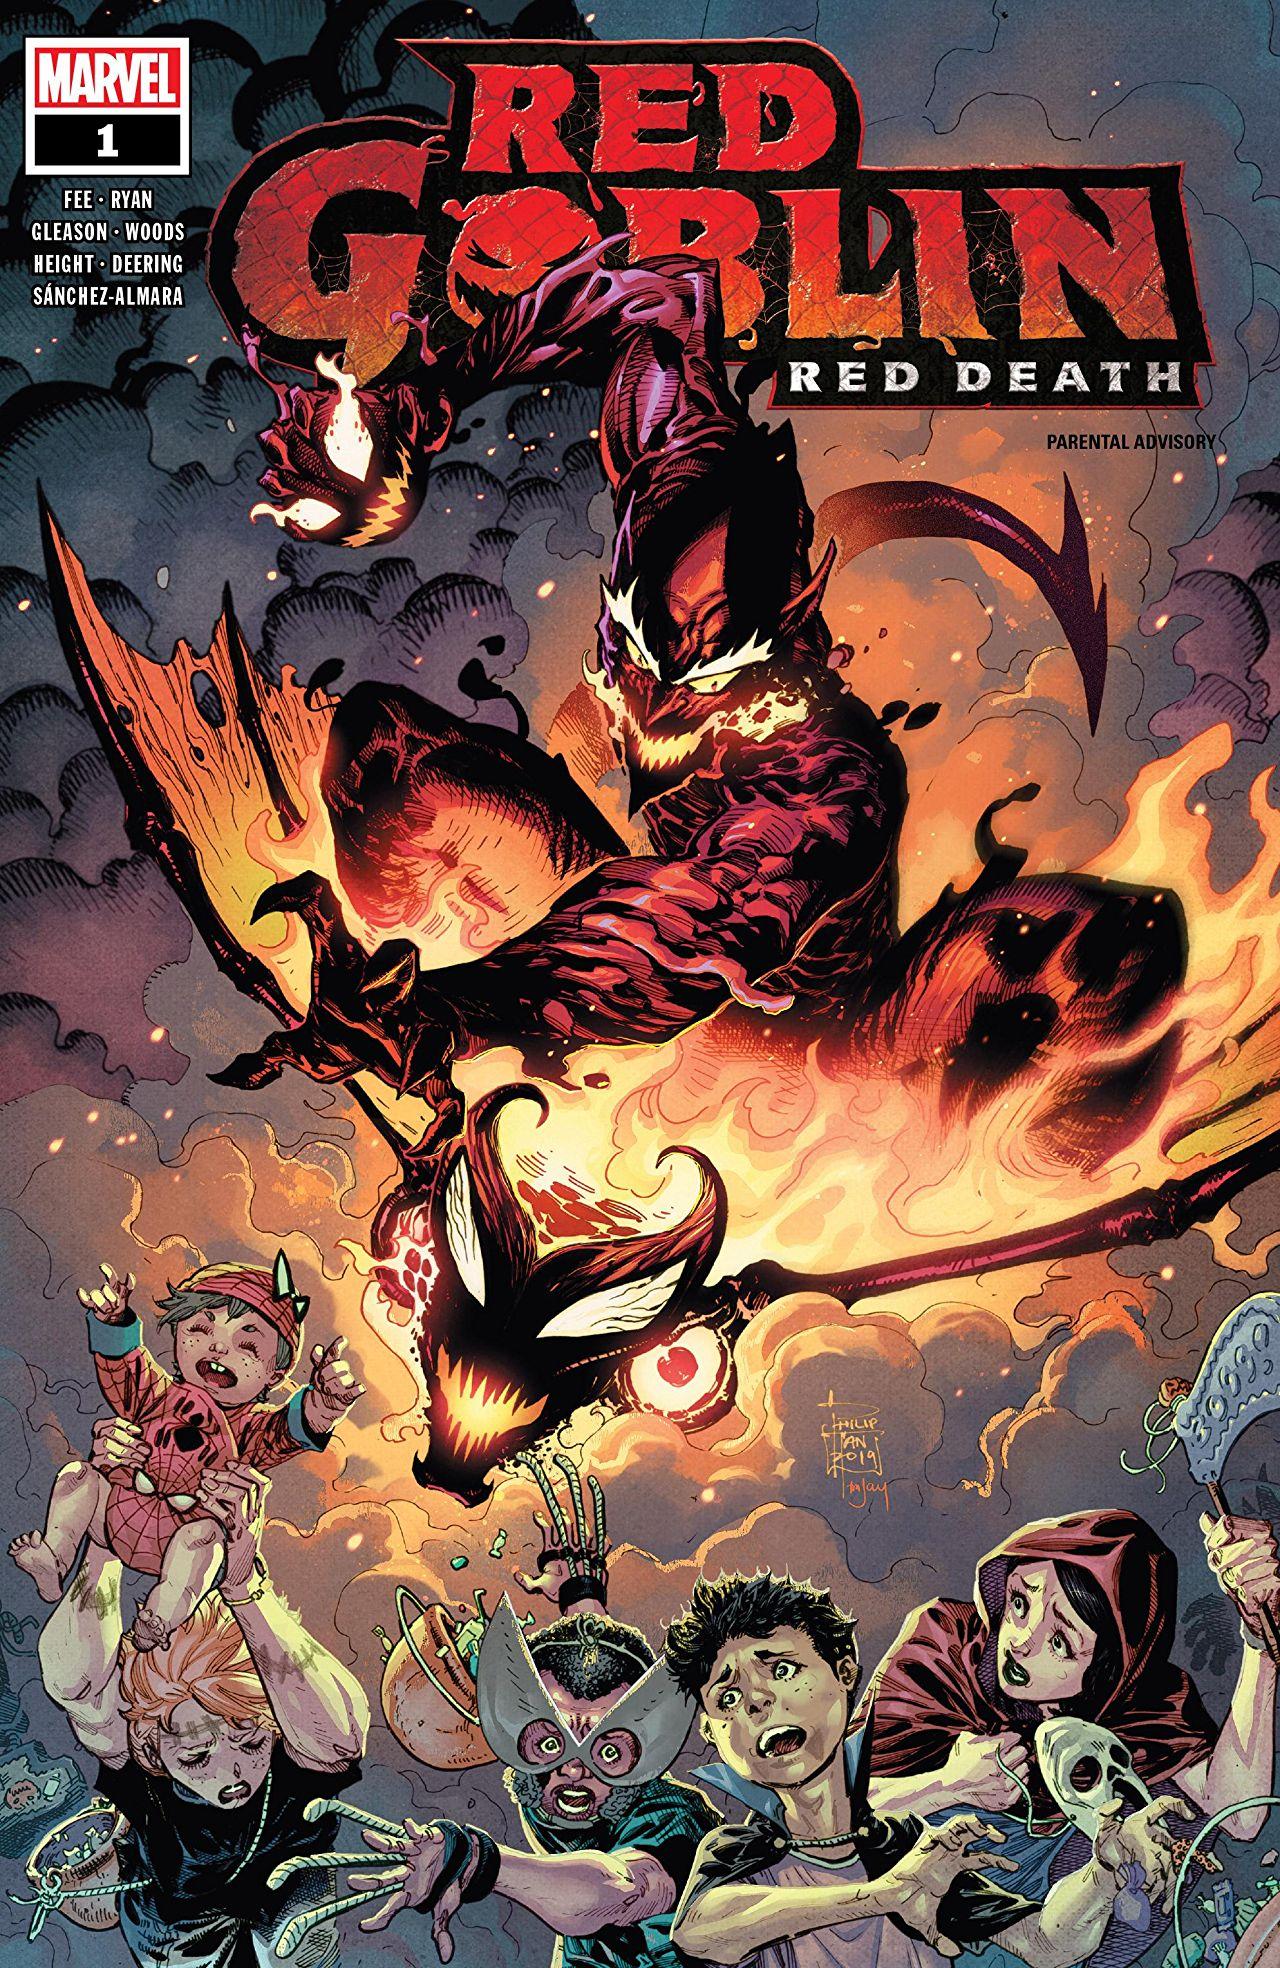 Red Goblin: Red Death Vol. 1 #1